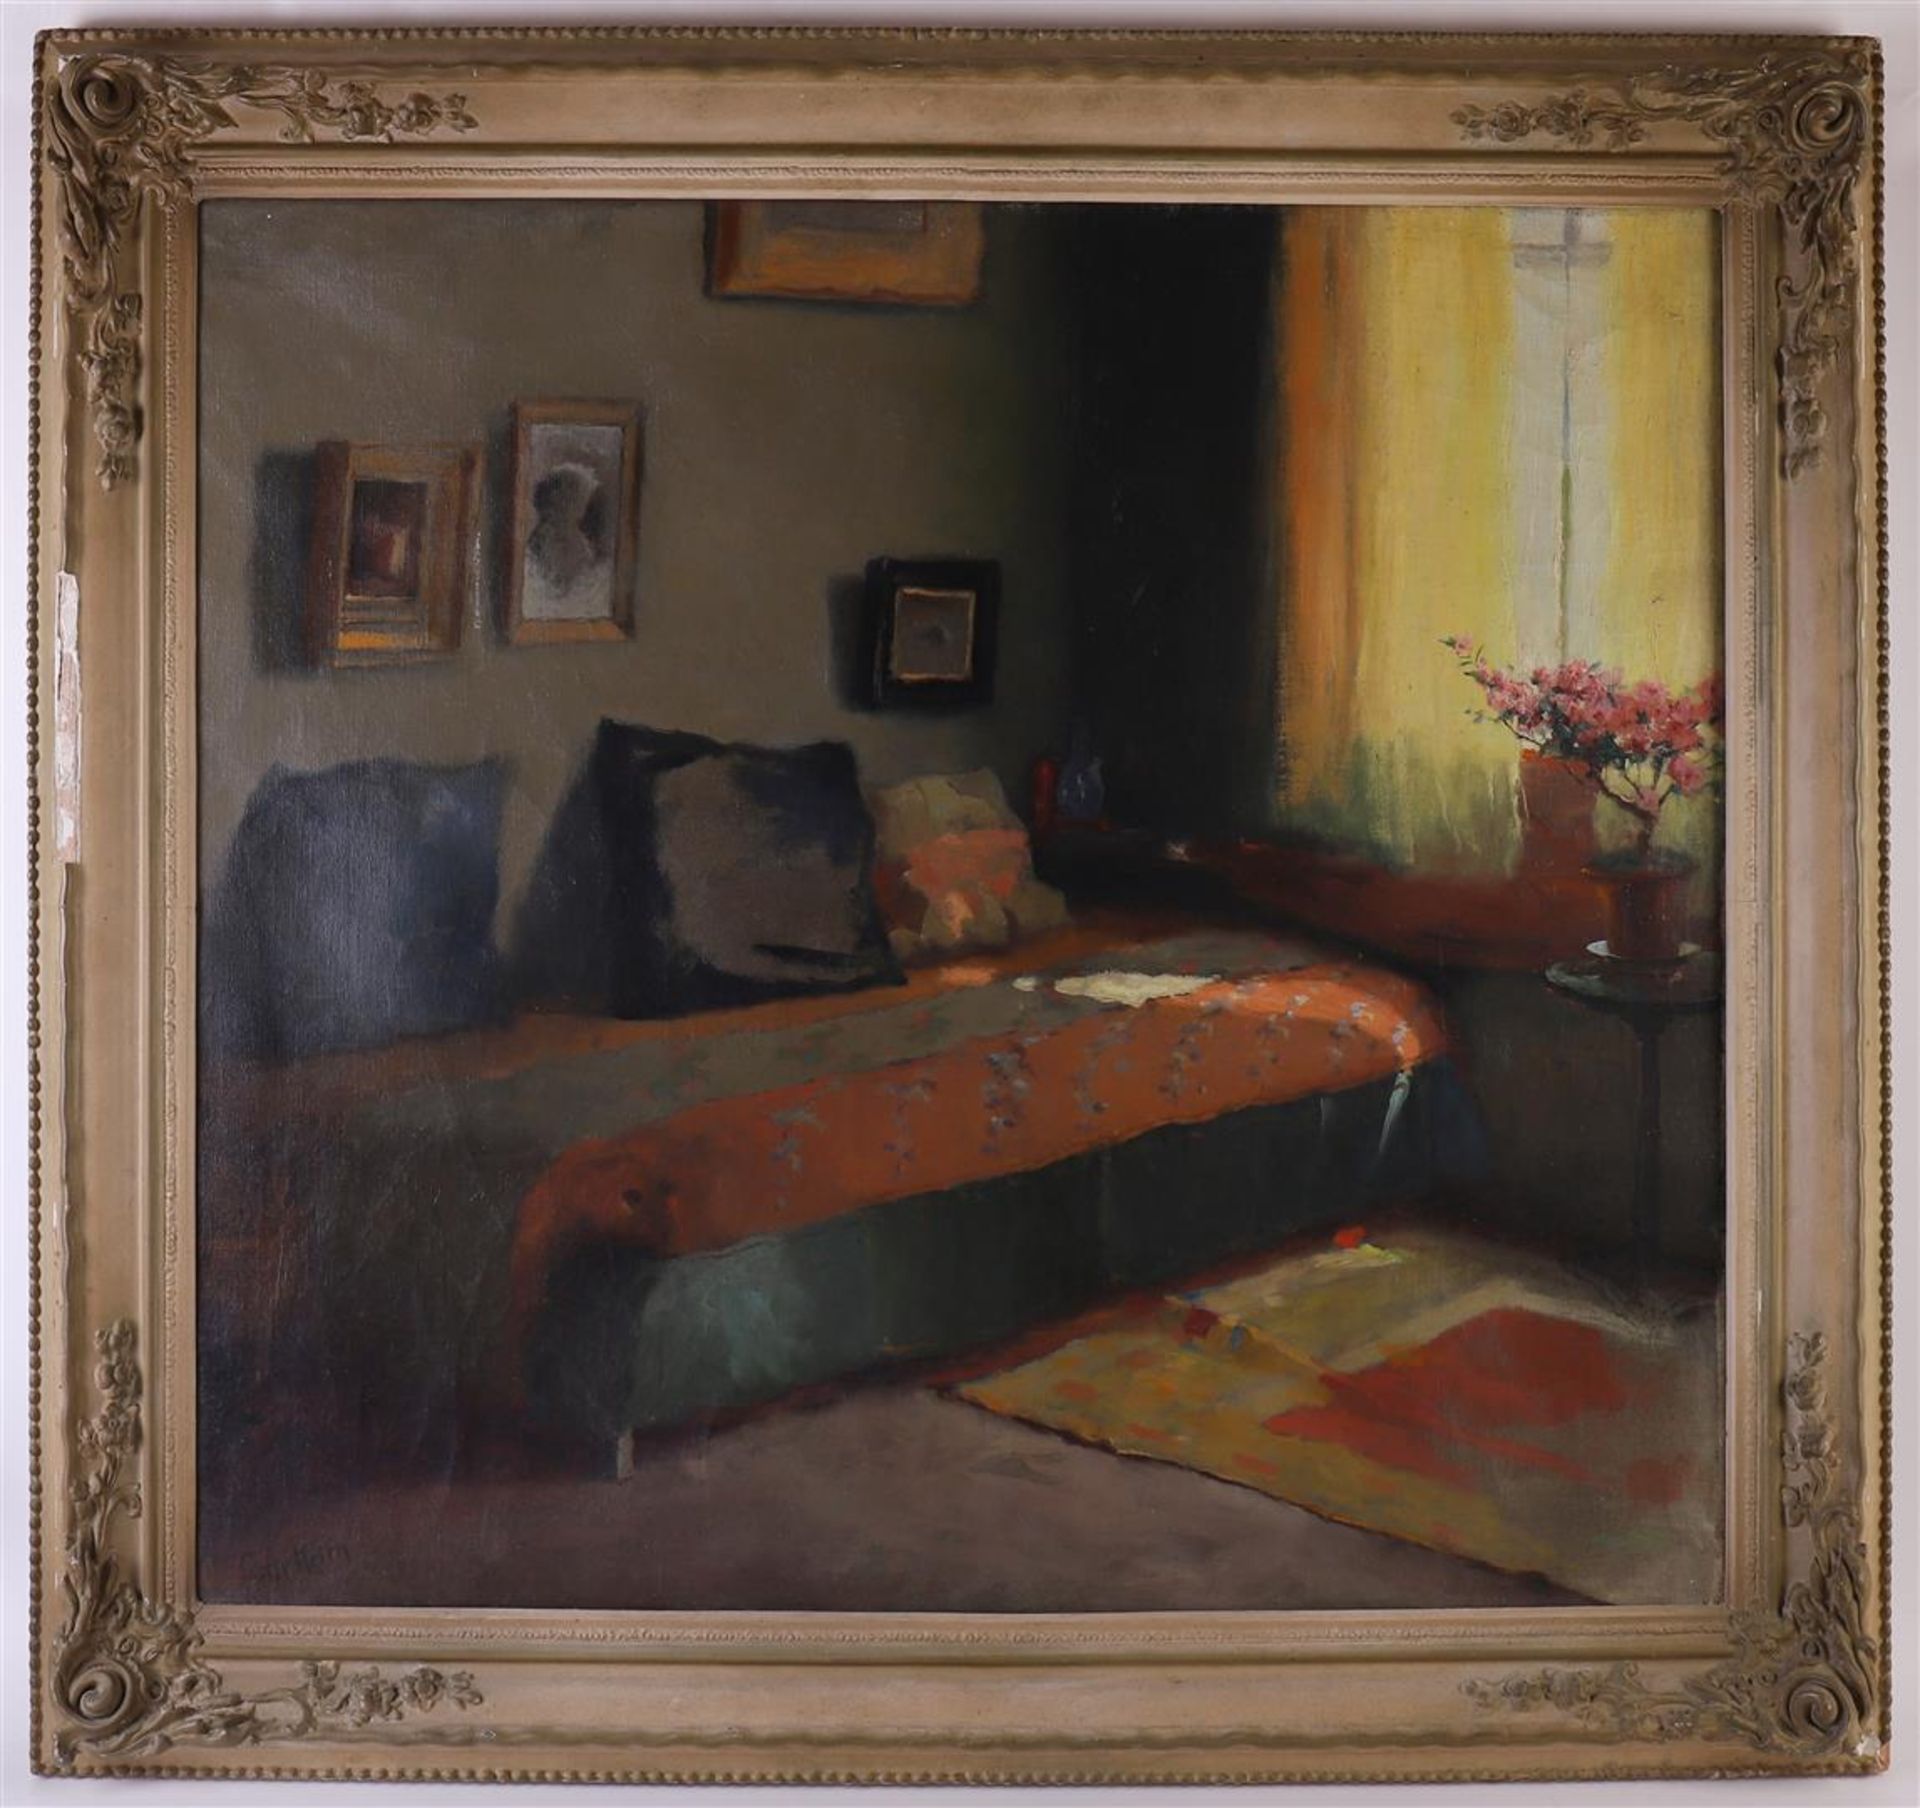 Keith, Castle (1863-1927) "Bedroom interior", signed in full lower left, oil paint/canvas, h 75 x